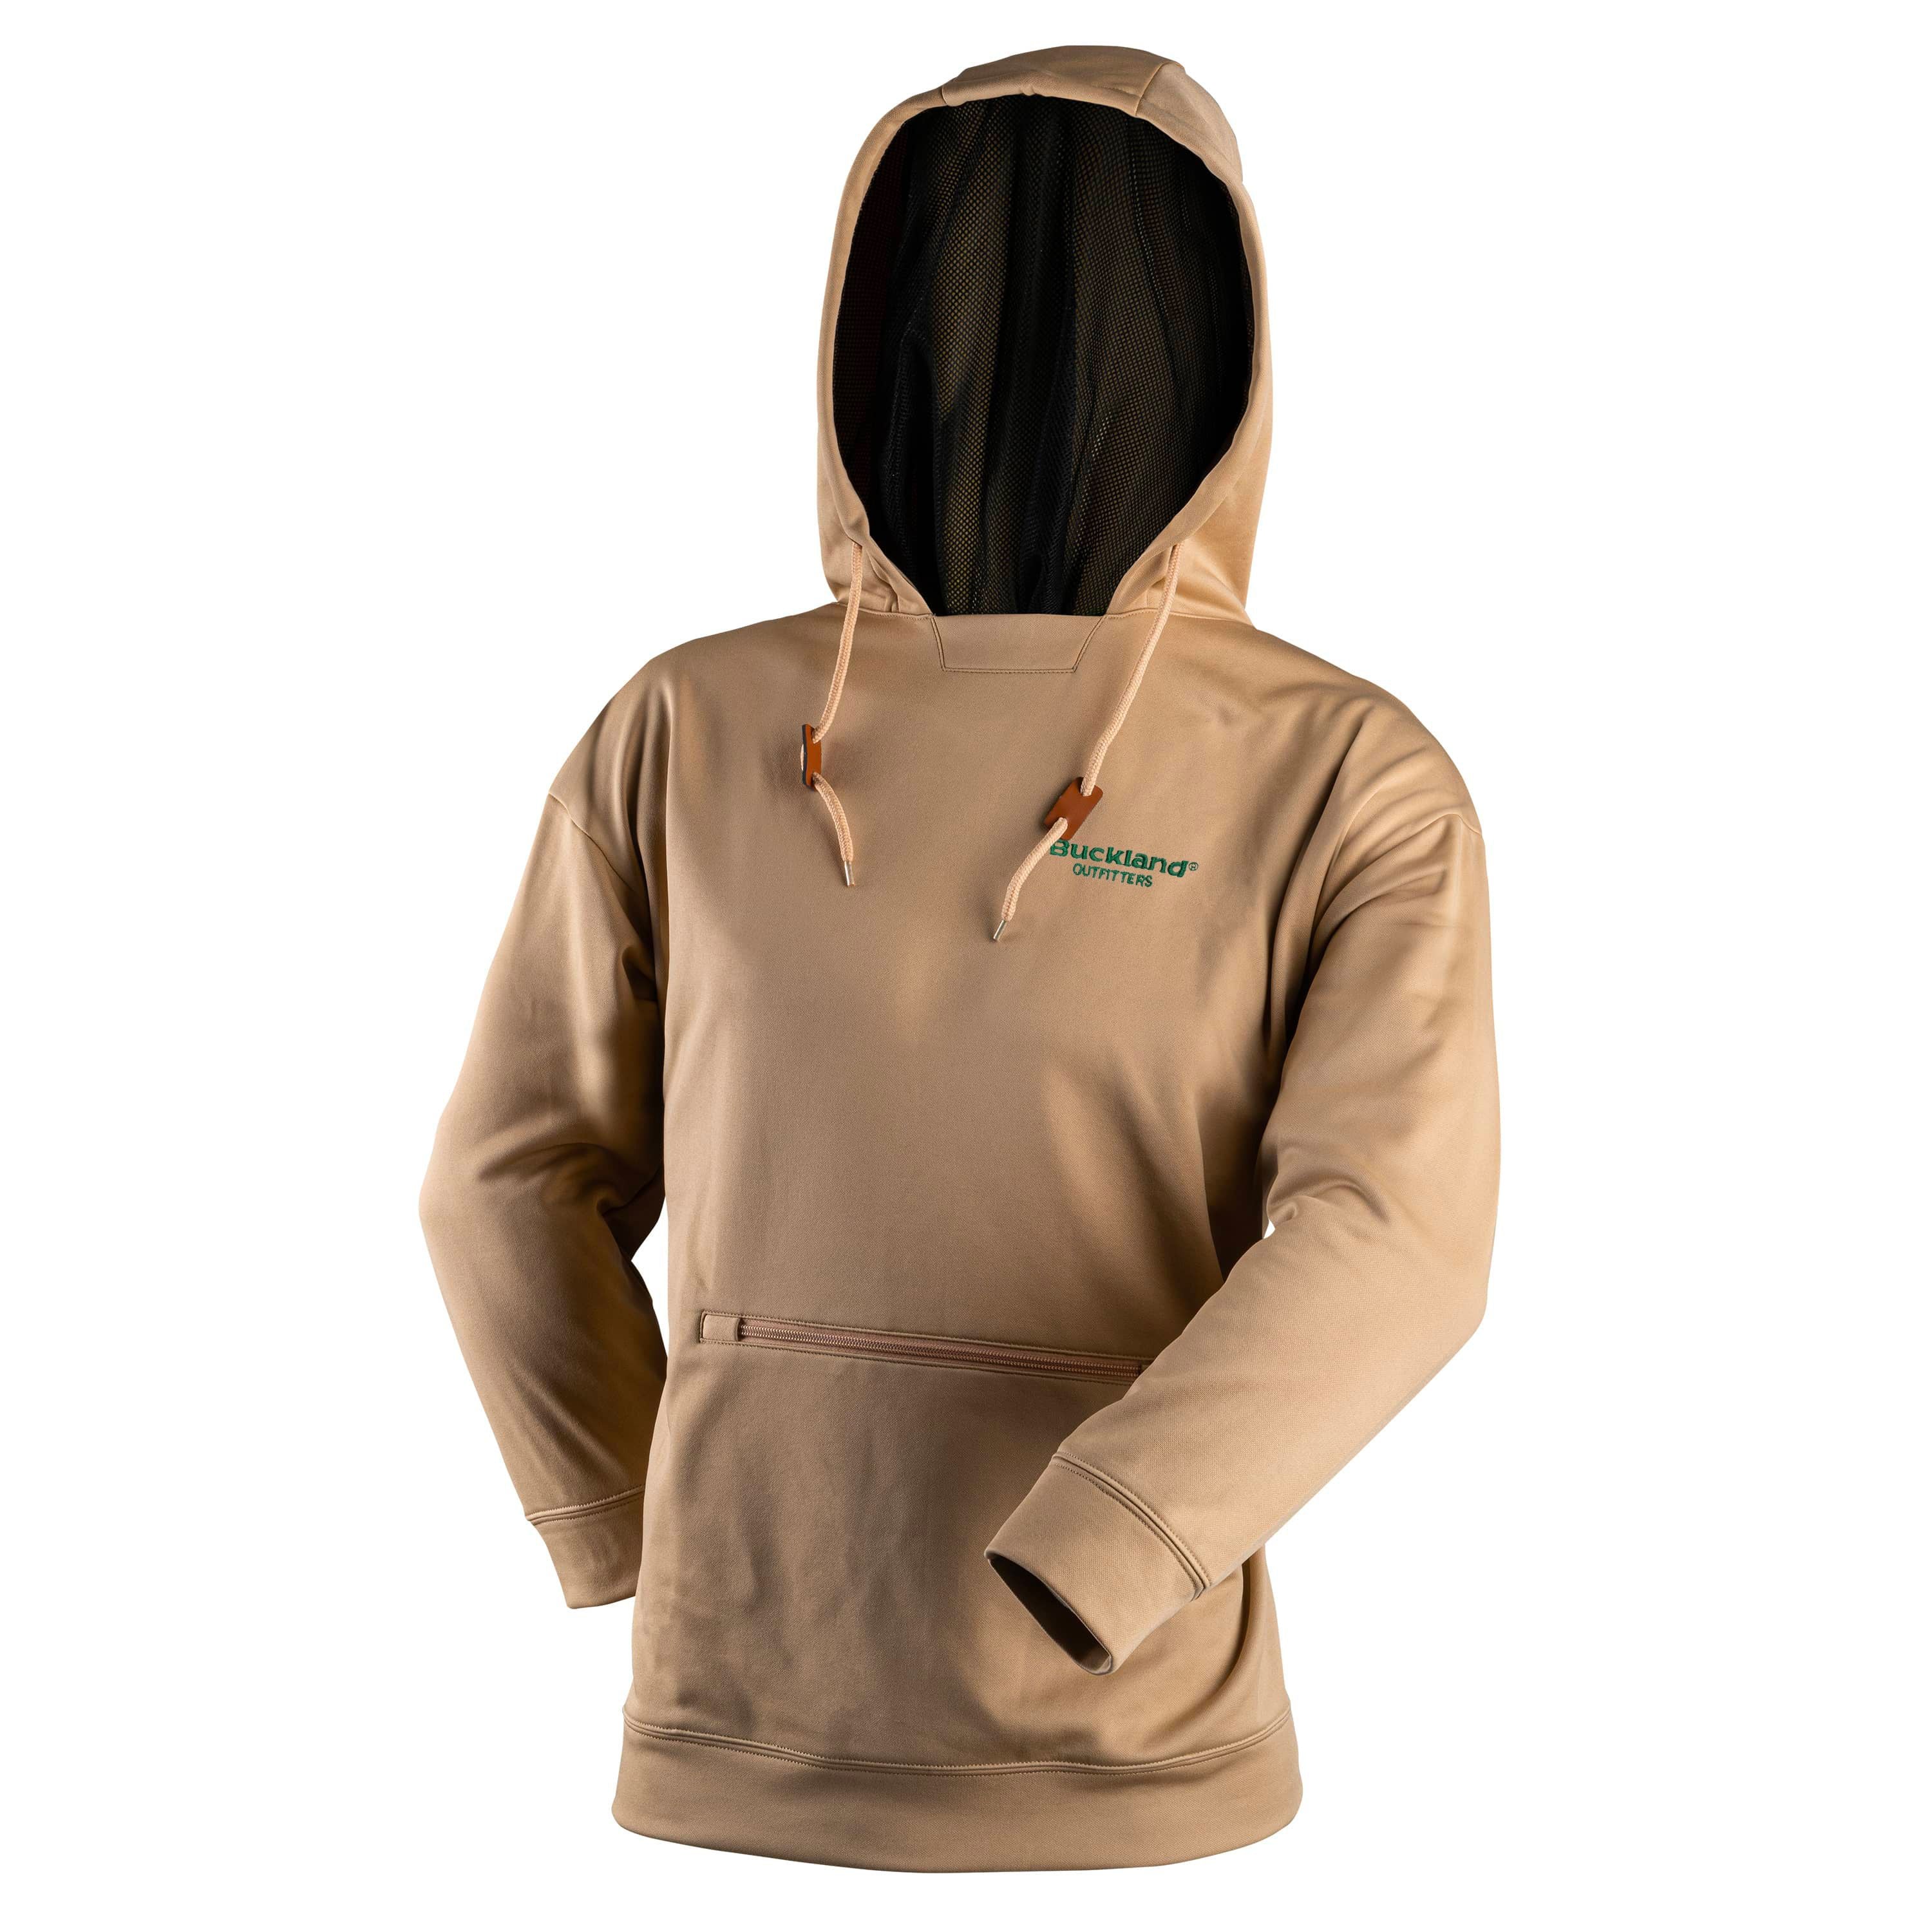 "Protect" Hooded sweater - Men's